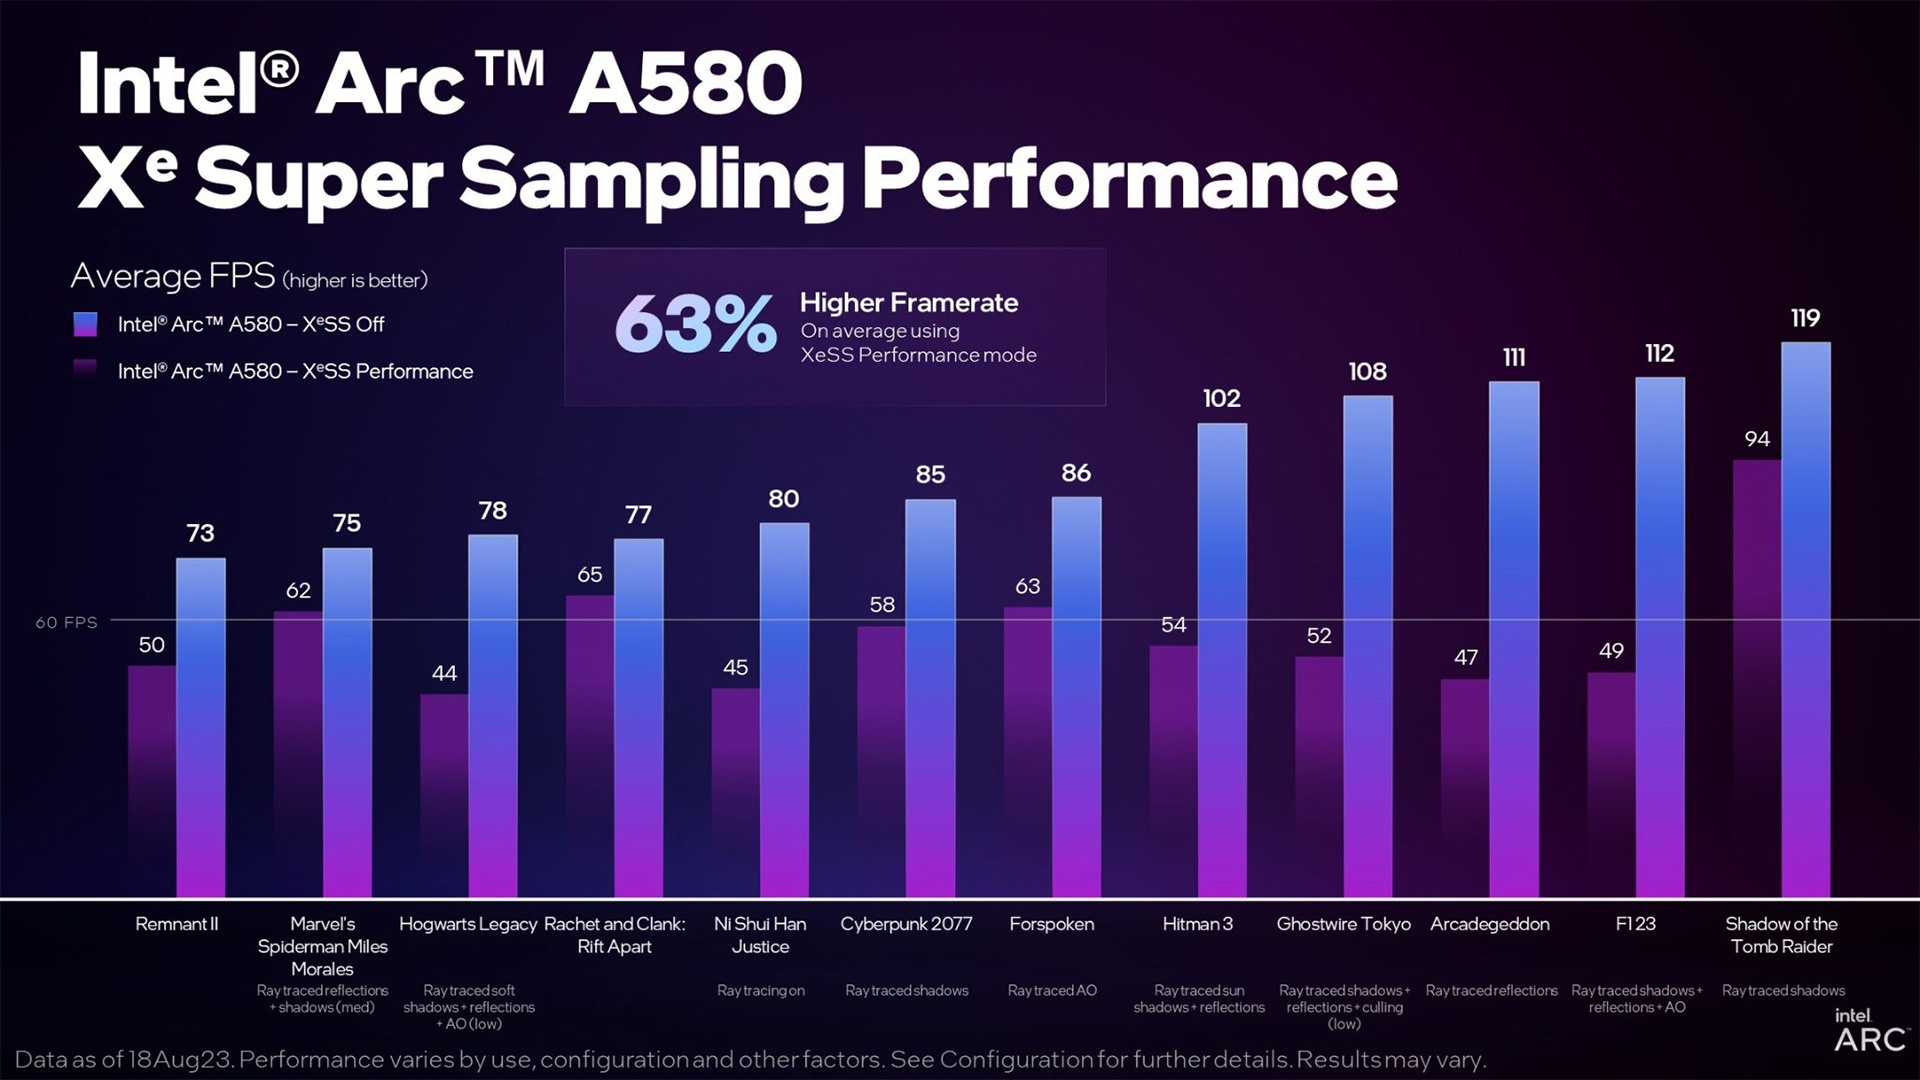 (The performance shown represents the FPS improvements due to the XeSS feature (Source: Intel))